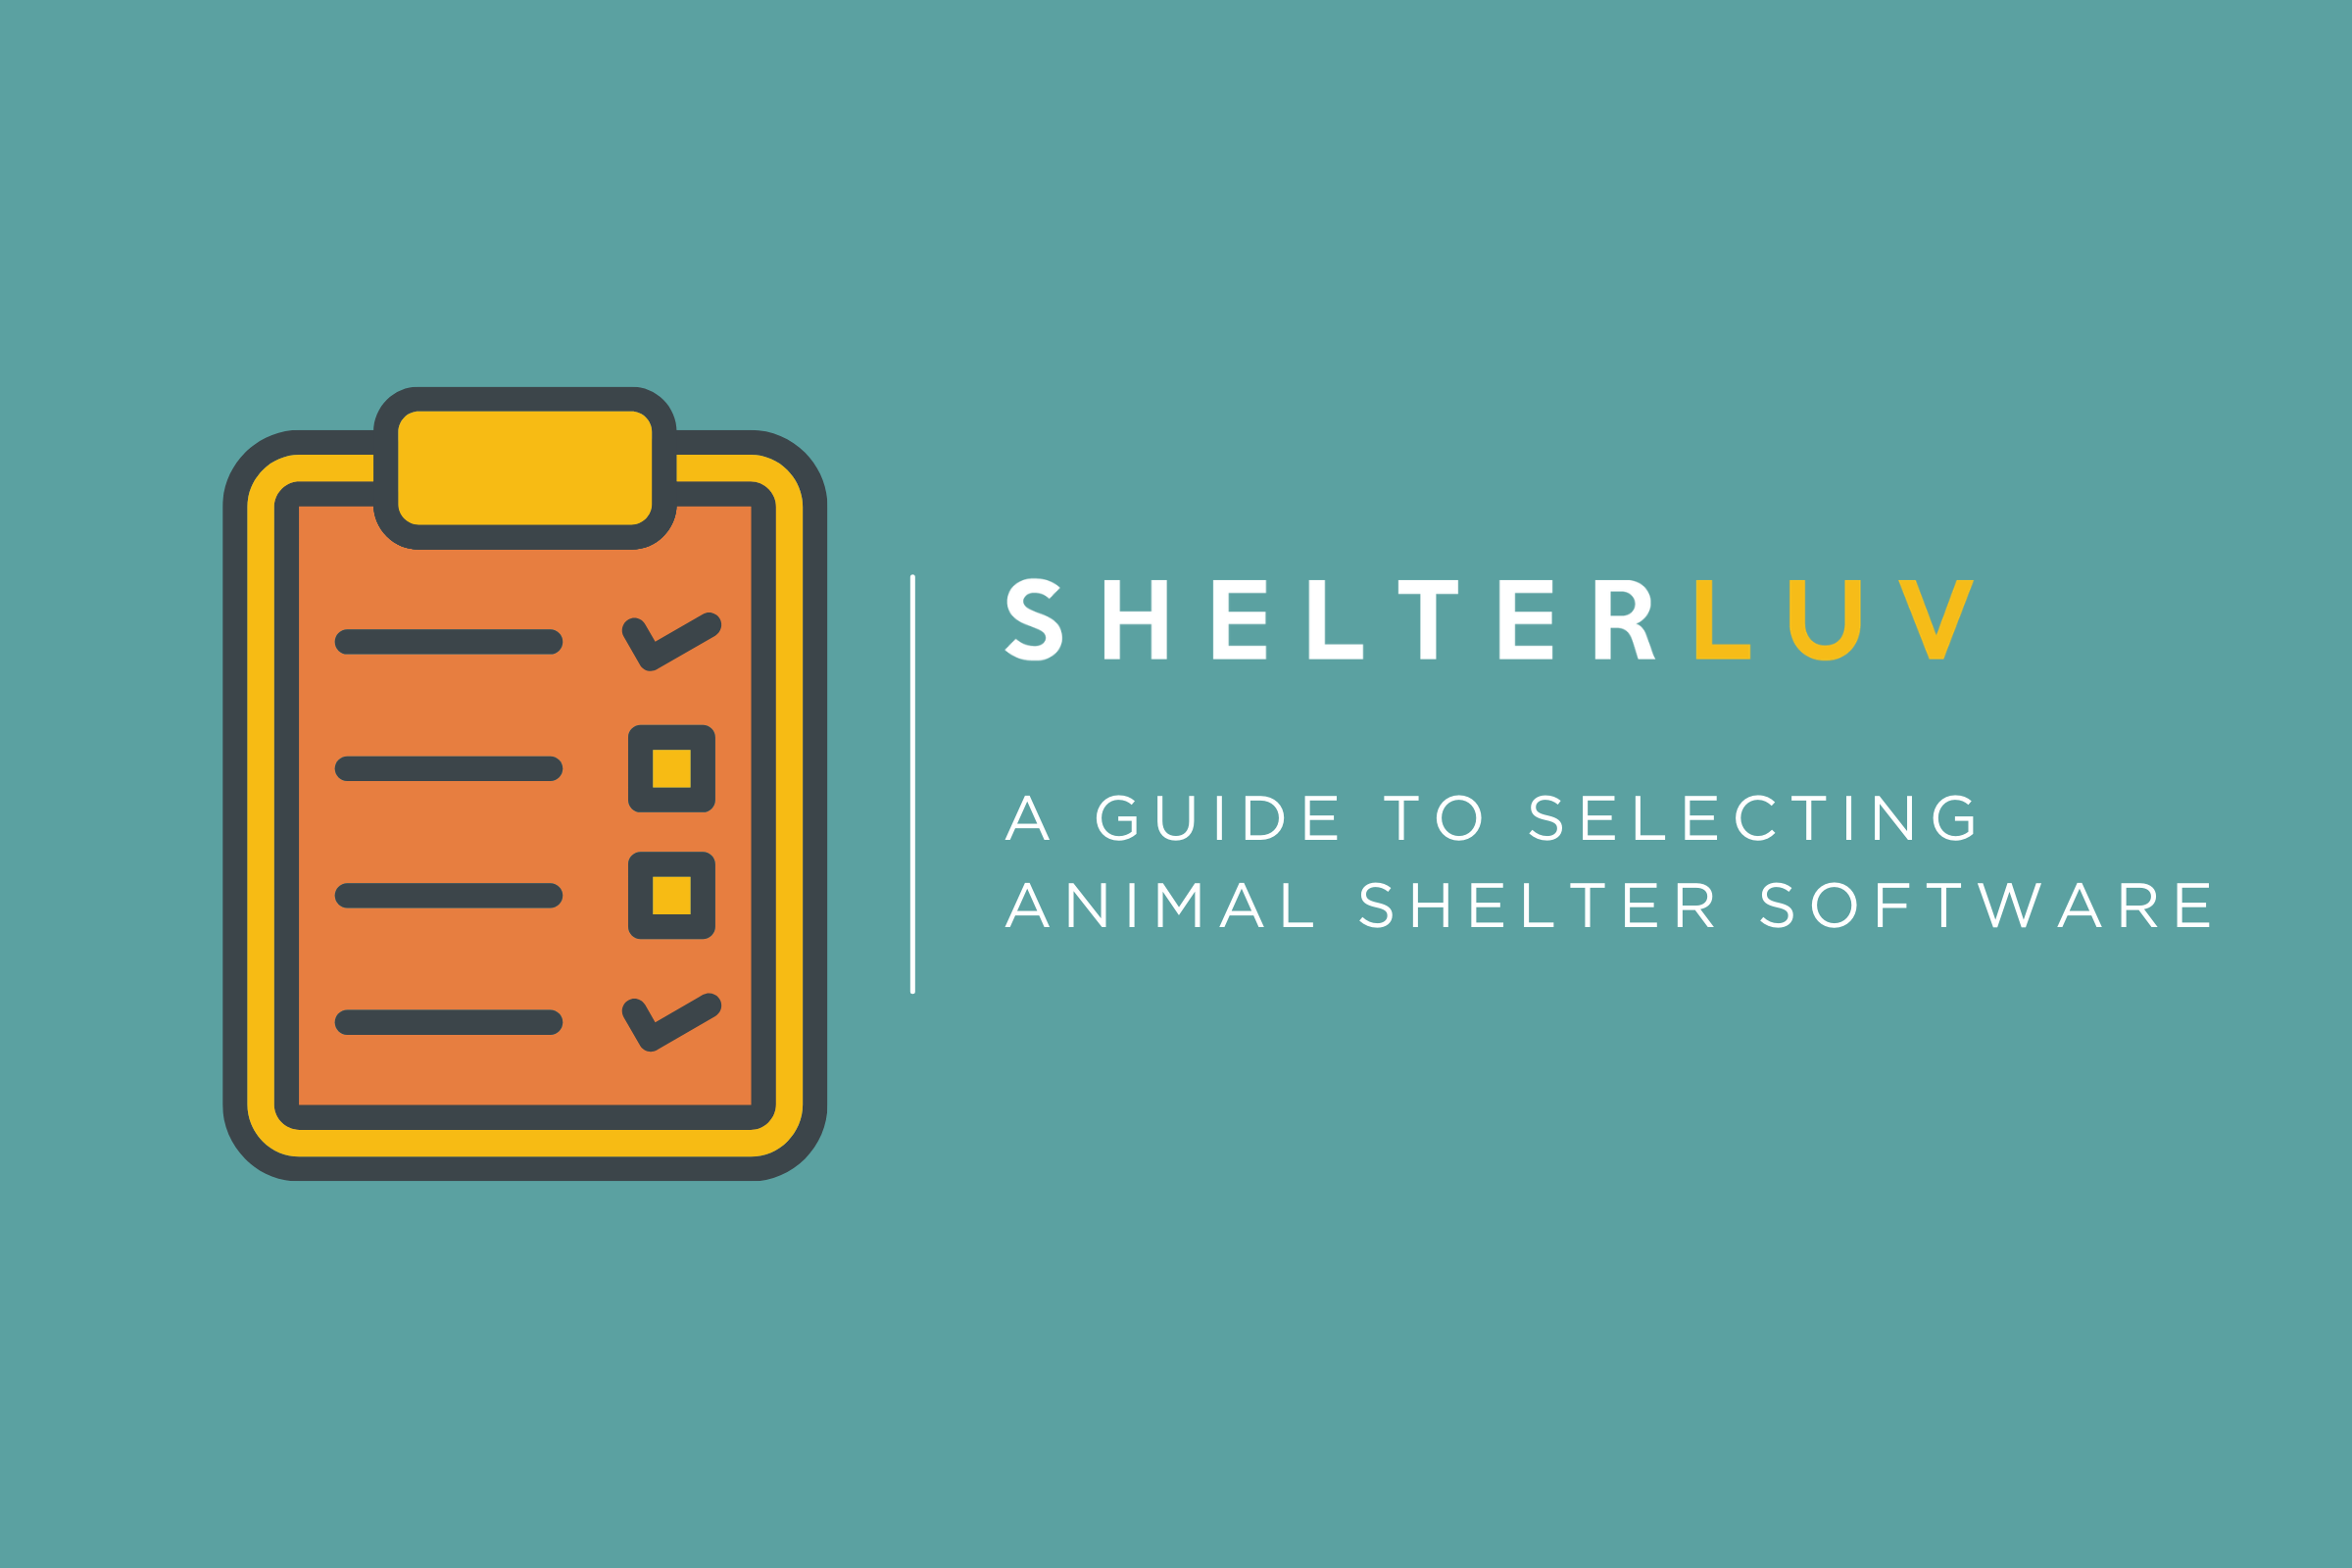 A guide to selecting animal shelter software | Shelterluv blog